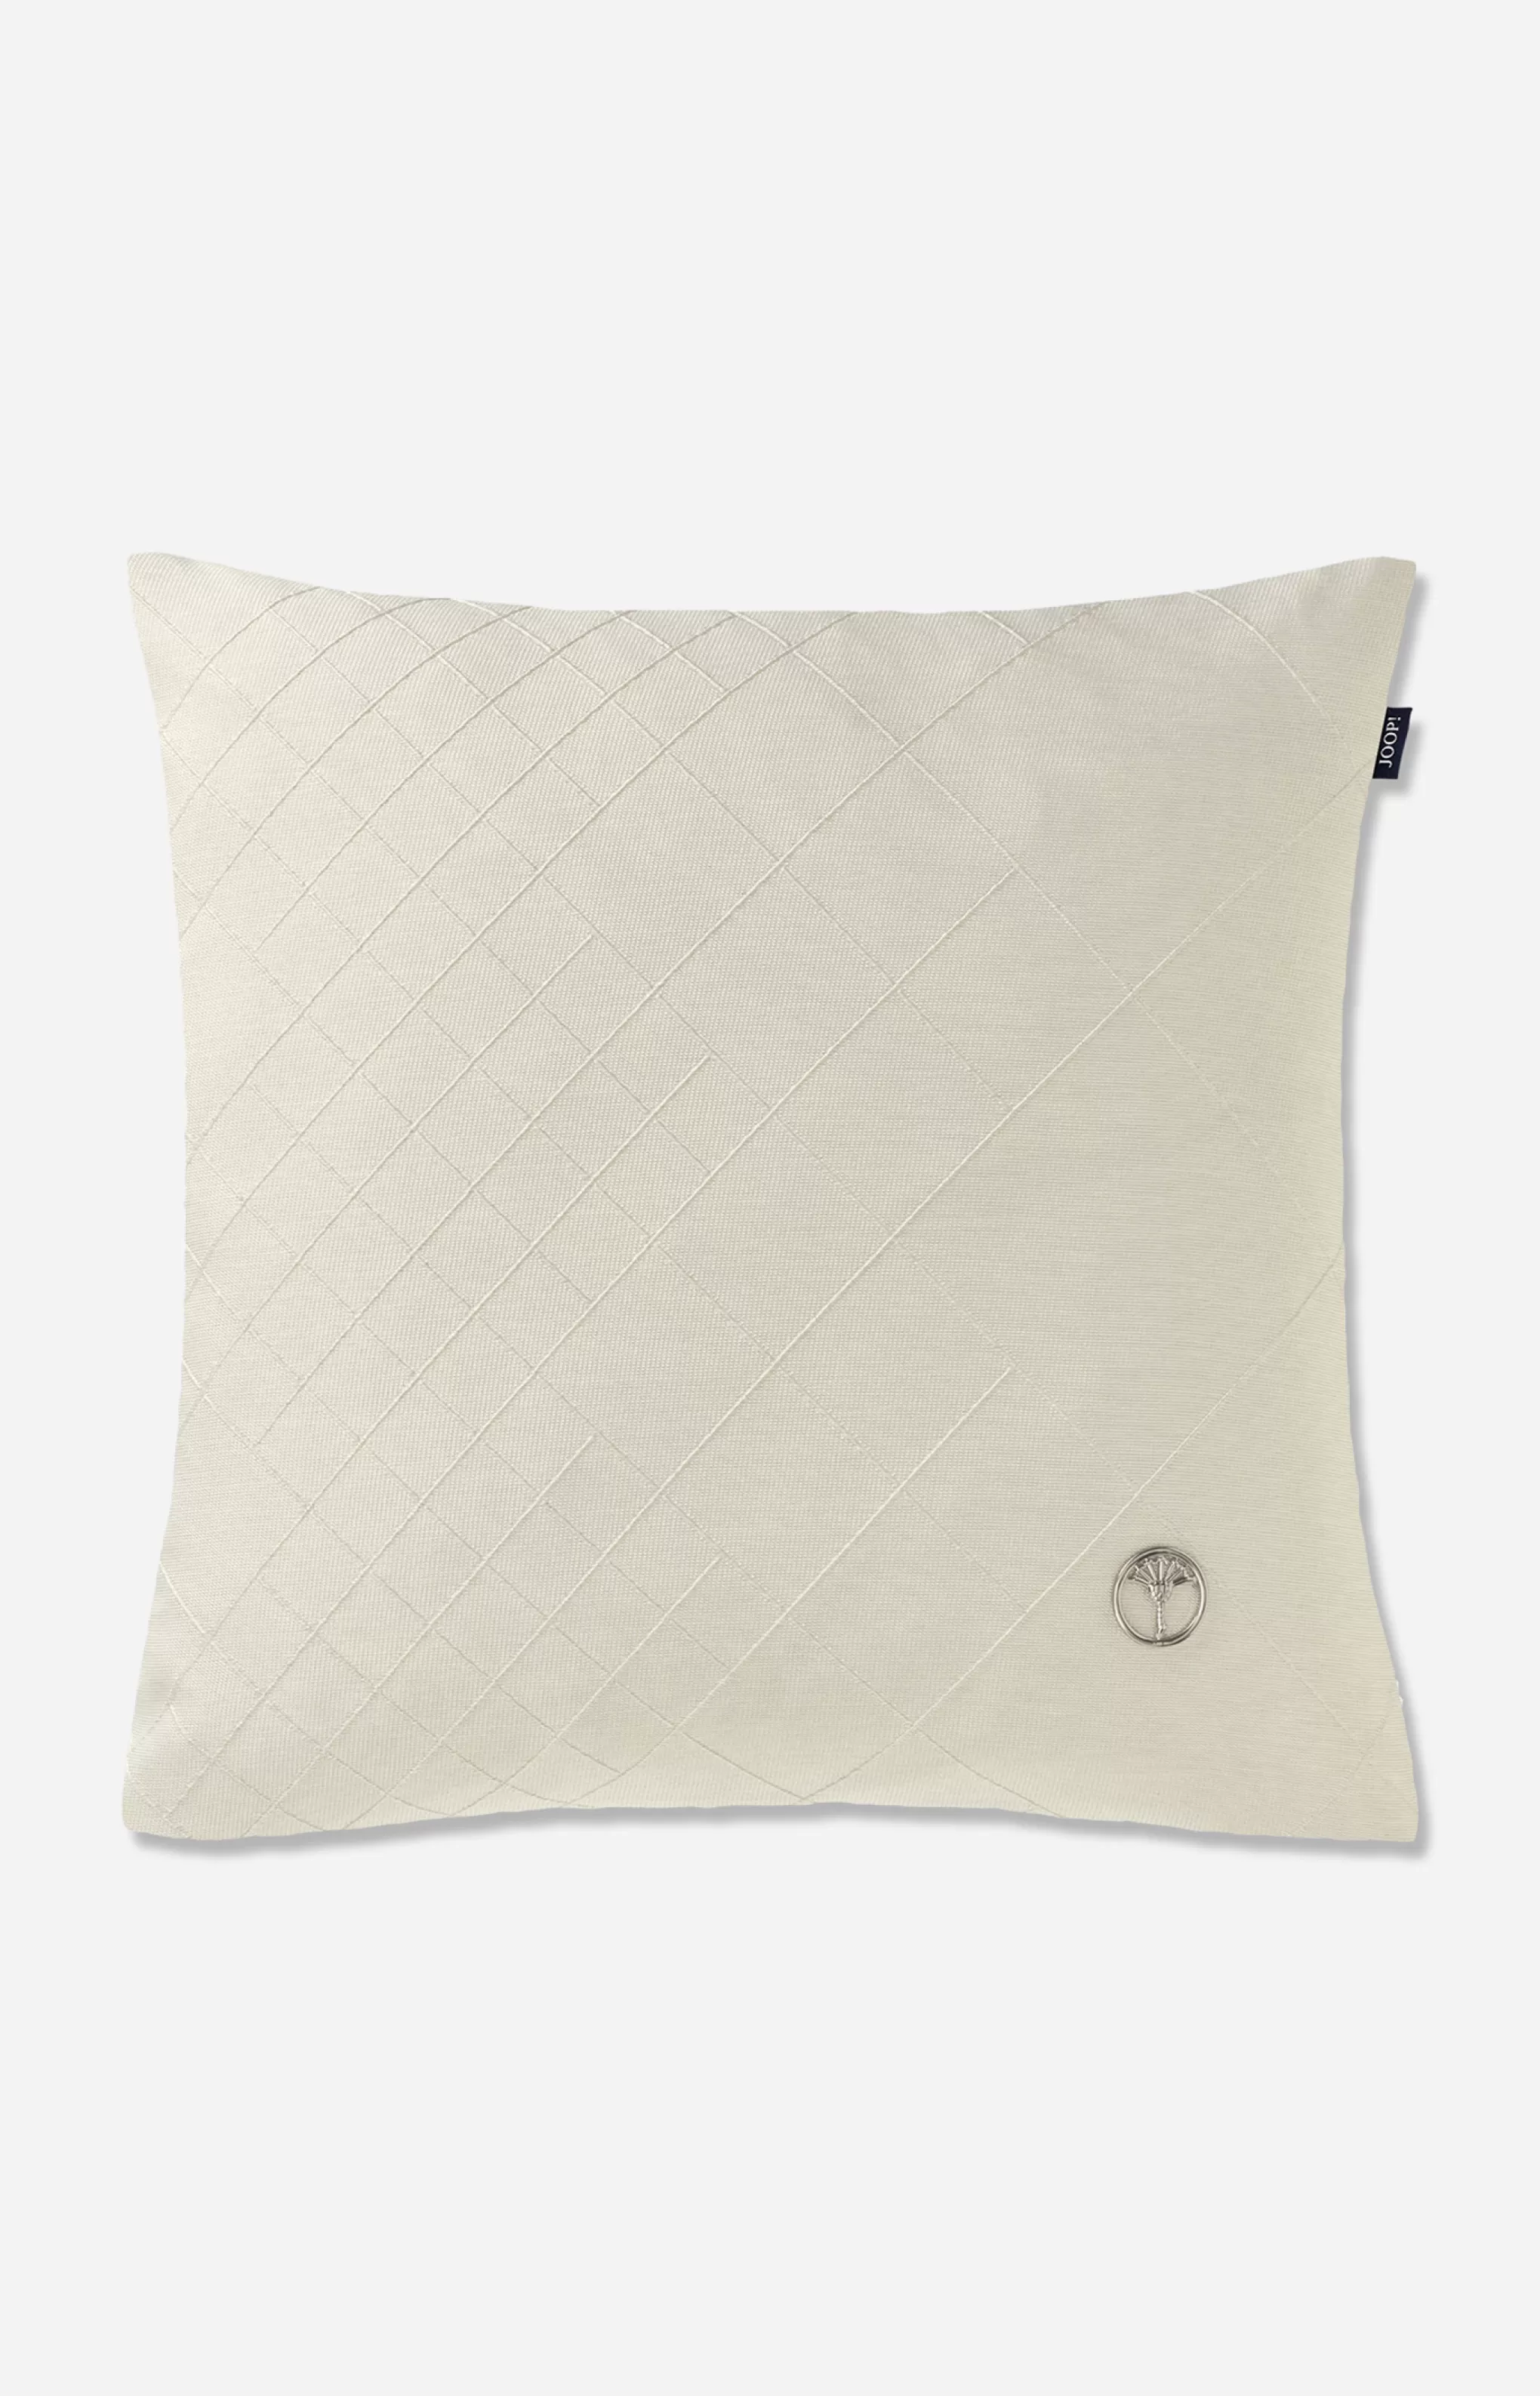 Decorative Cushions | Discover Everything*JOOP Decorative Cushions | Discover Everything ! MOTION Decorative Cushion Cover in